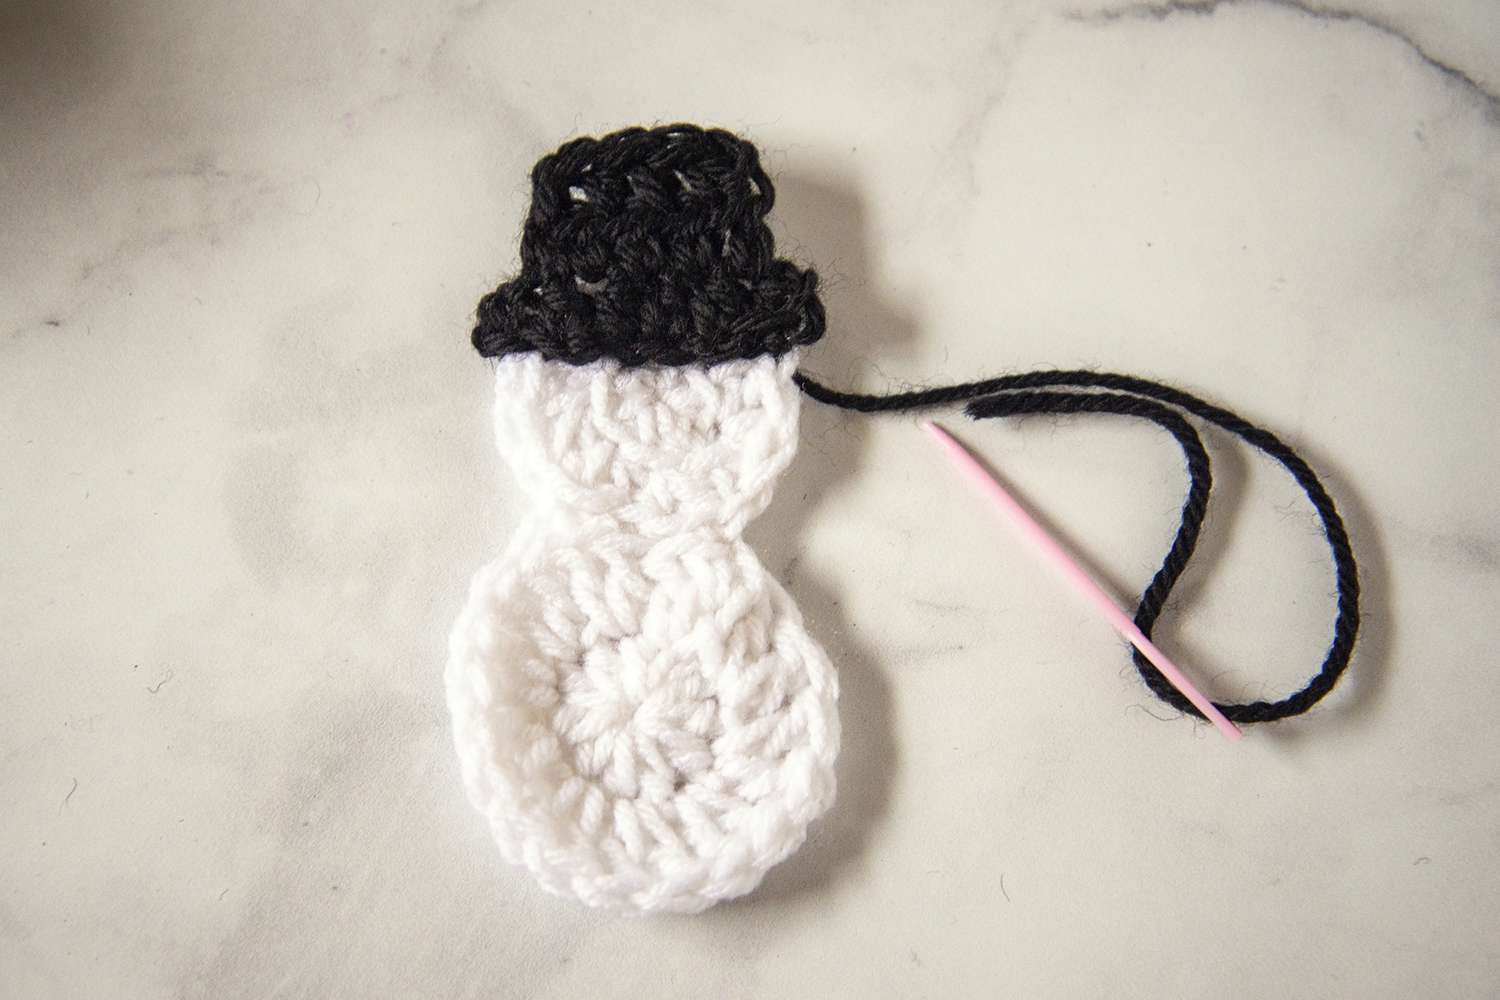 A crocheted snowman with black hat.